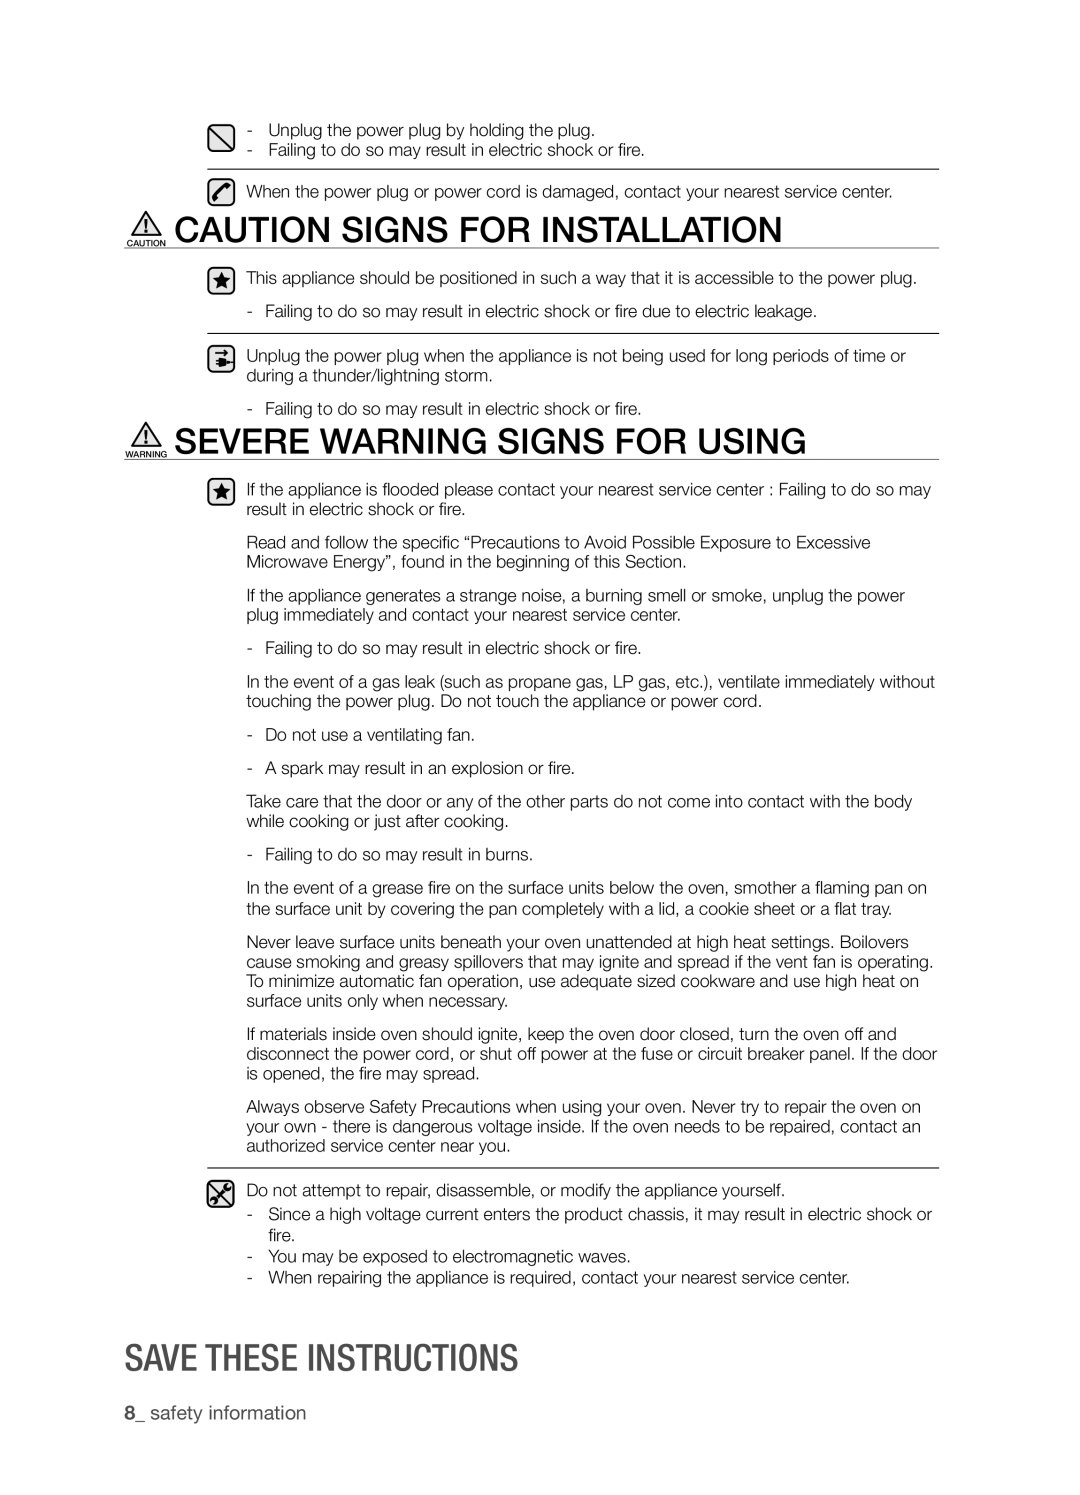 Samsung SMH9151B Caution Caution Signs For Installation, Warning Severe Warning Signs For Using, Save these instructions 